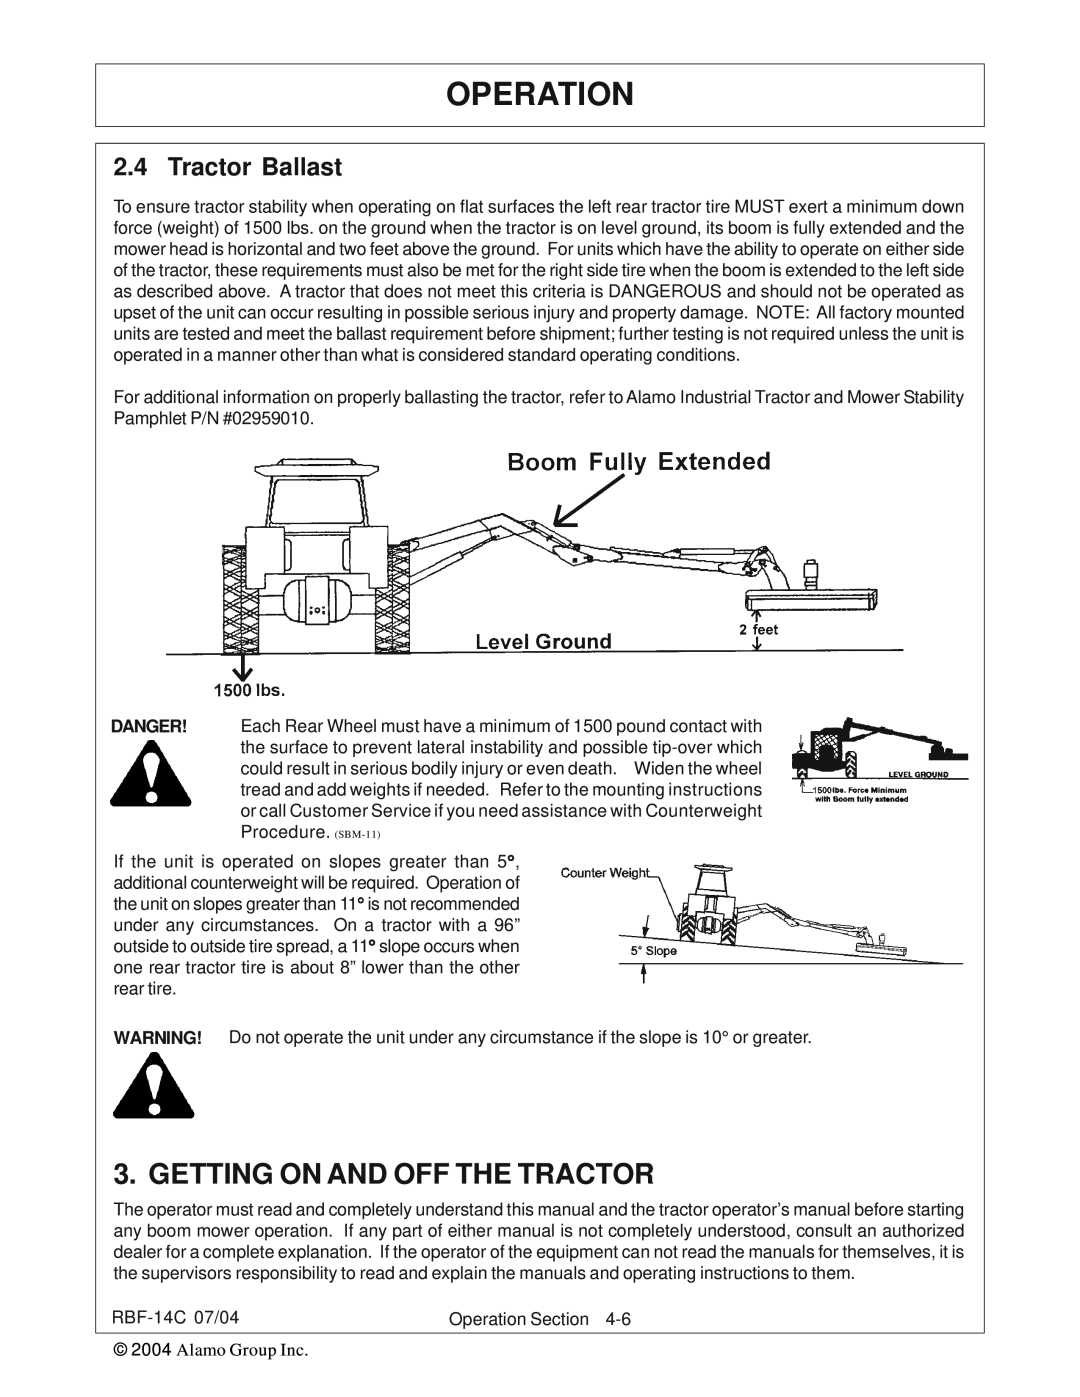 Tiger RBF-14C manual Getting On And Off The Tractor, Operation, Tractor Ballast 